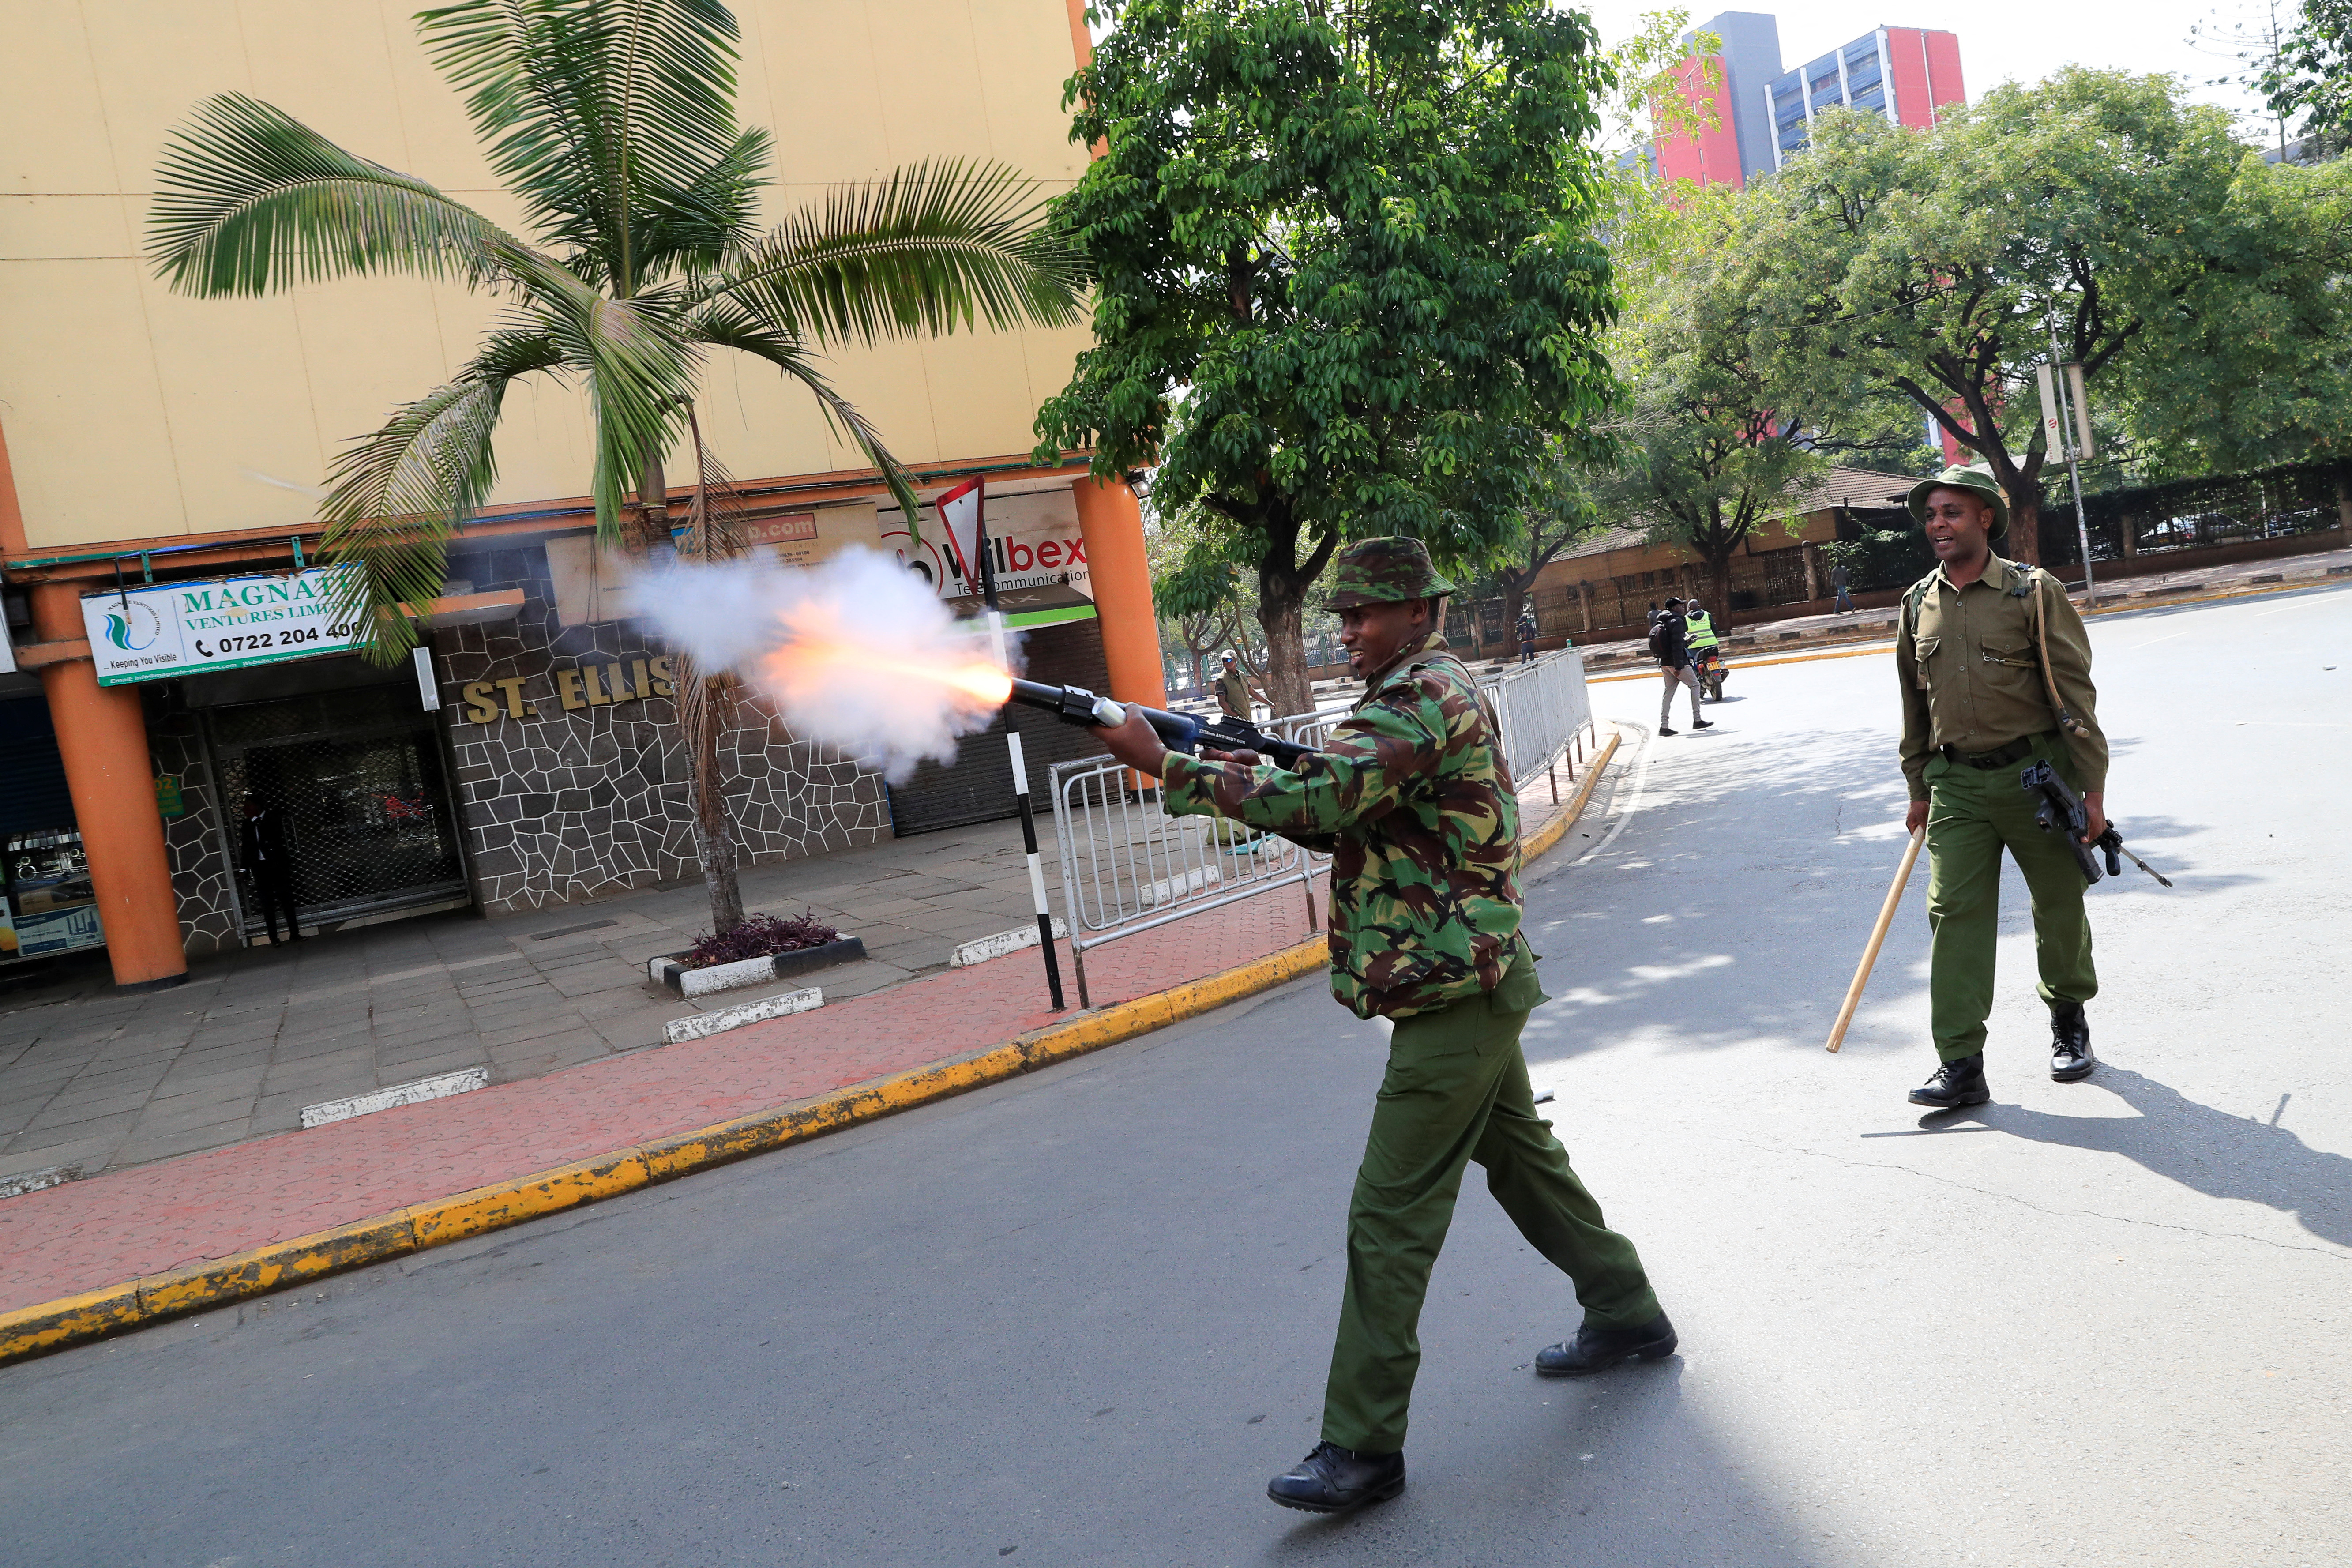 Riot police officer fires teargas to disperse supporters of Kenya's opposition leader Raila Odinga of the Azimio La Umoja (Declaration of Unity) One Kenya Alliance, during protests in Nairobi